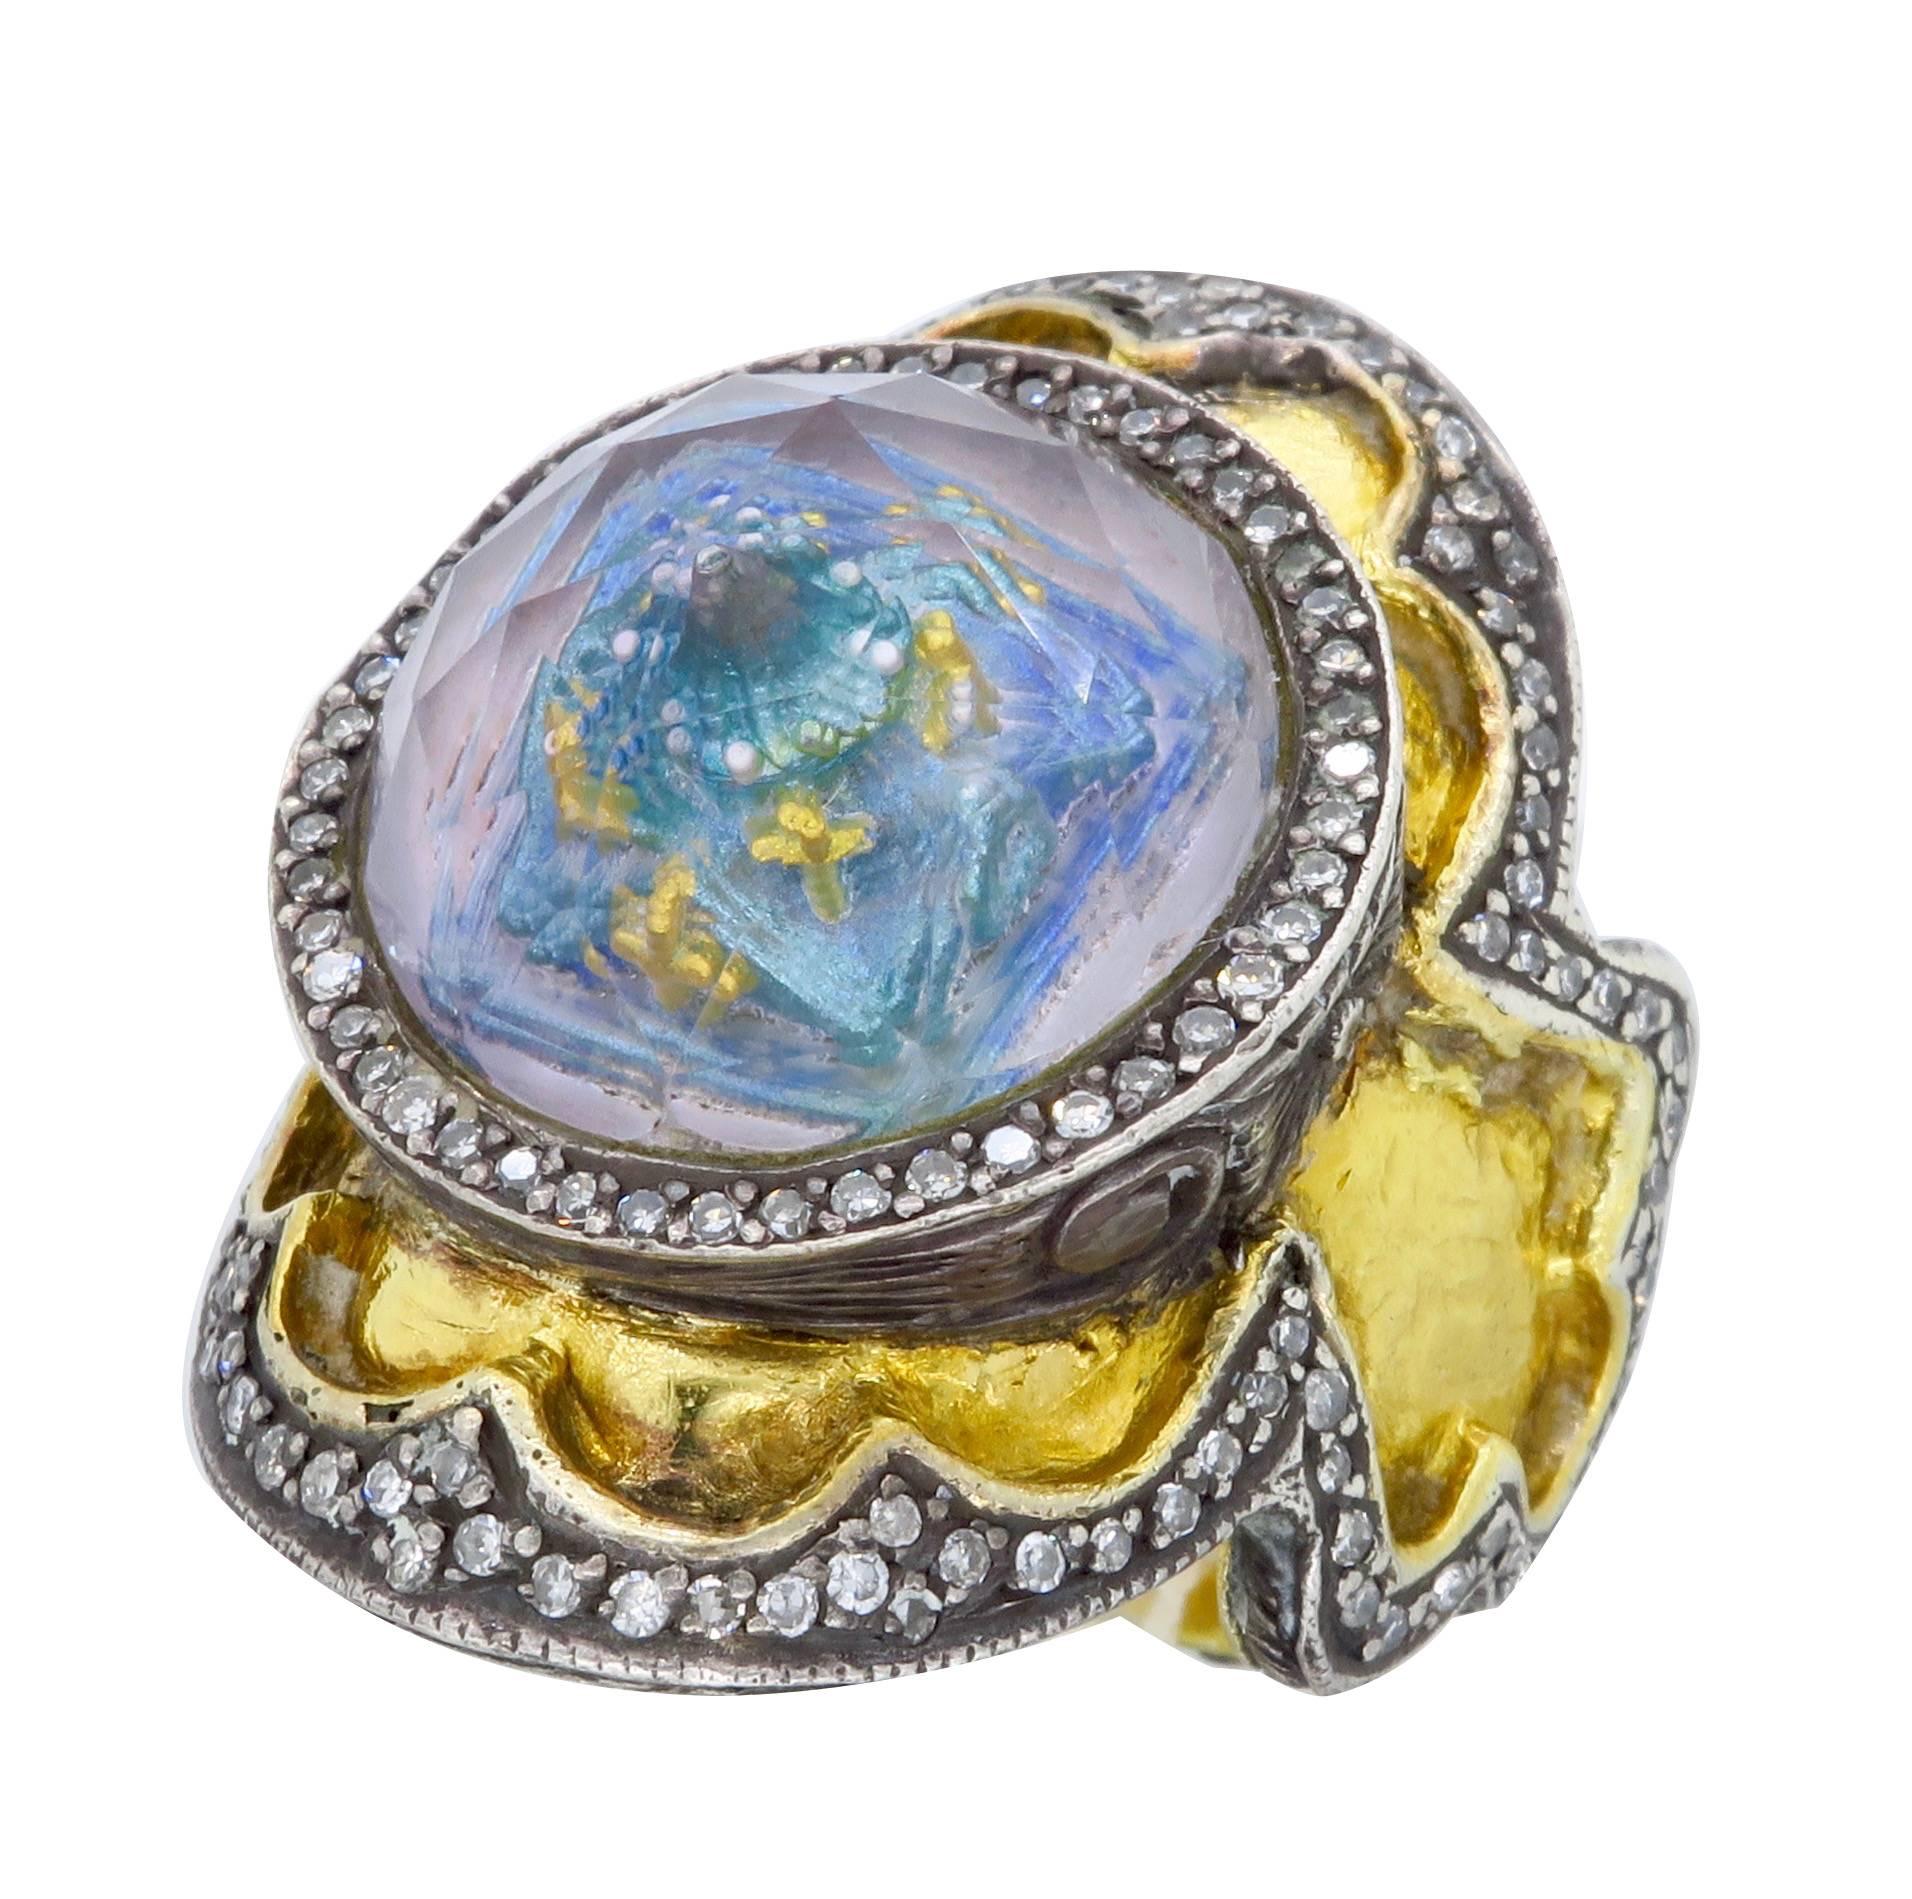 Hand crafted by the exclusive designer Sevan Biçakçi from his Theodora collection. All of Sevan's rings are one of a kind. The ring is 24K yellow gold with sterling silver accents. It features a large reverse cut amethyst that contains a beautiful